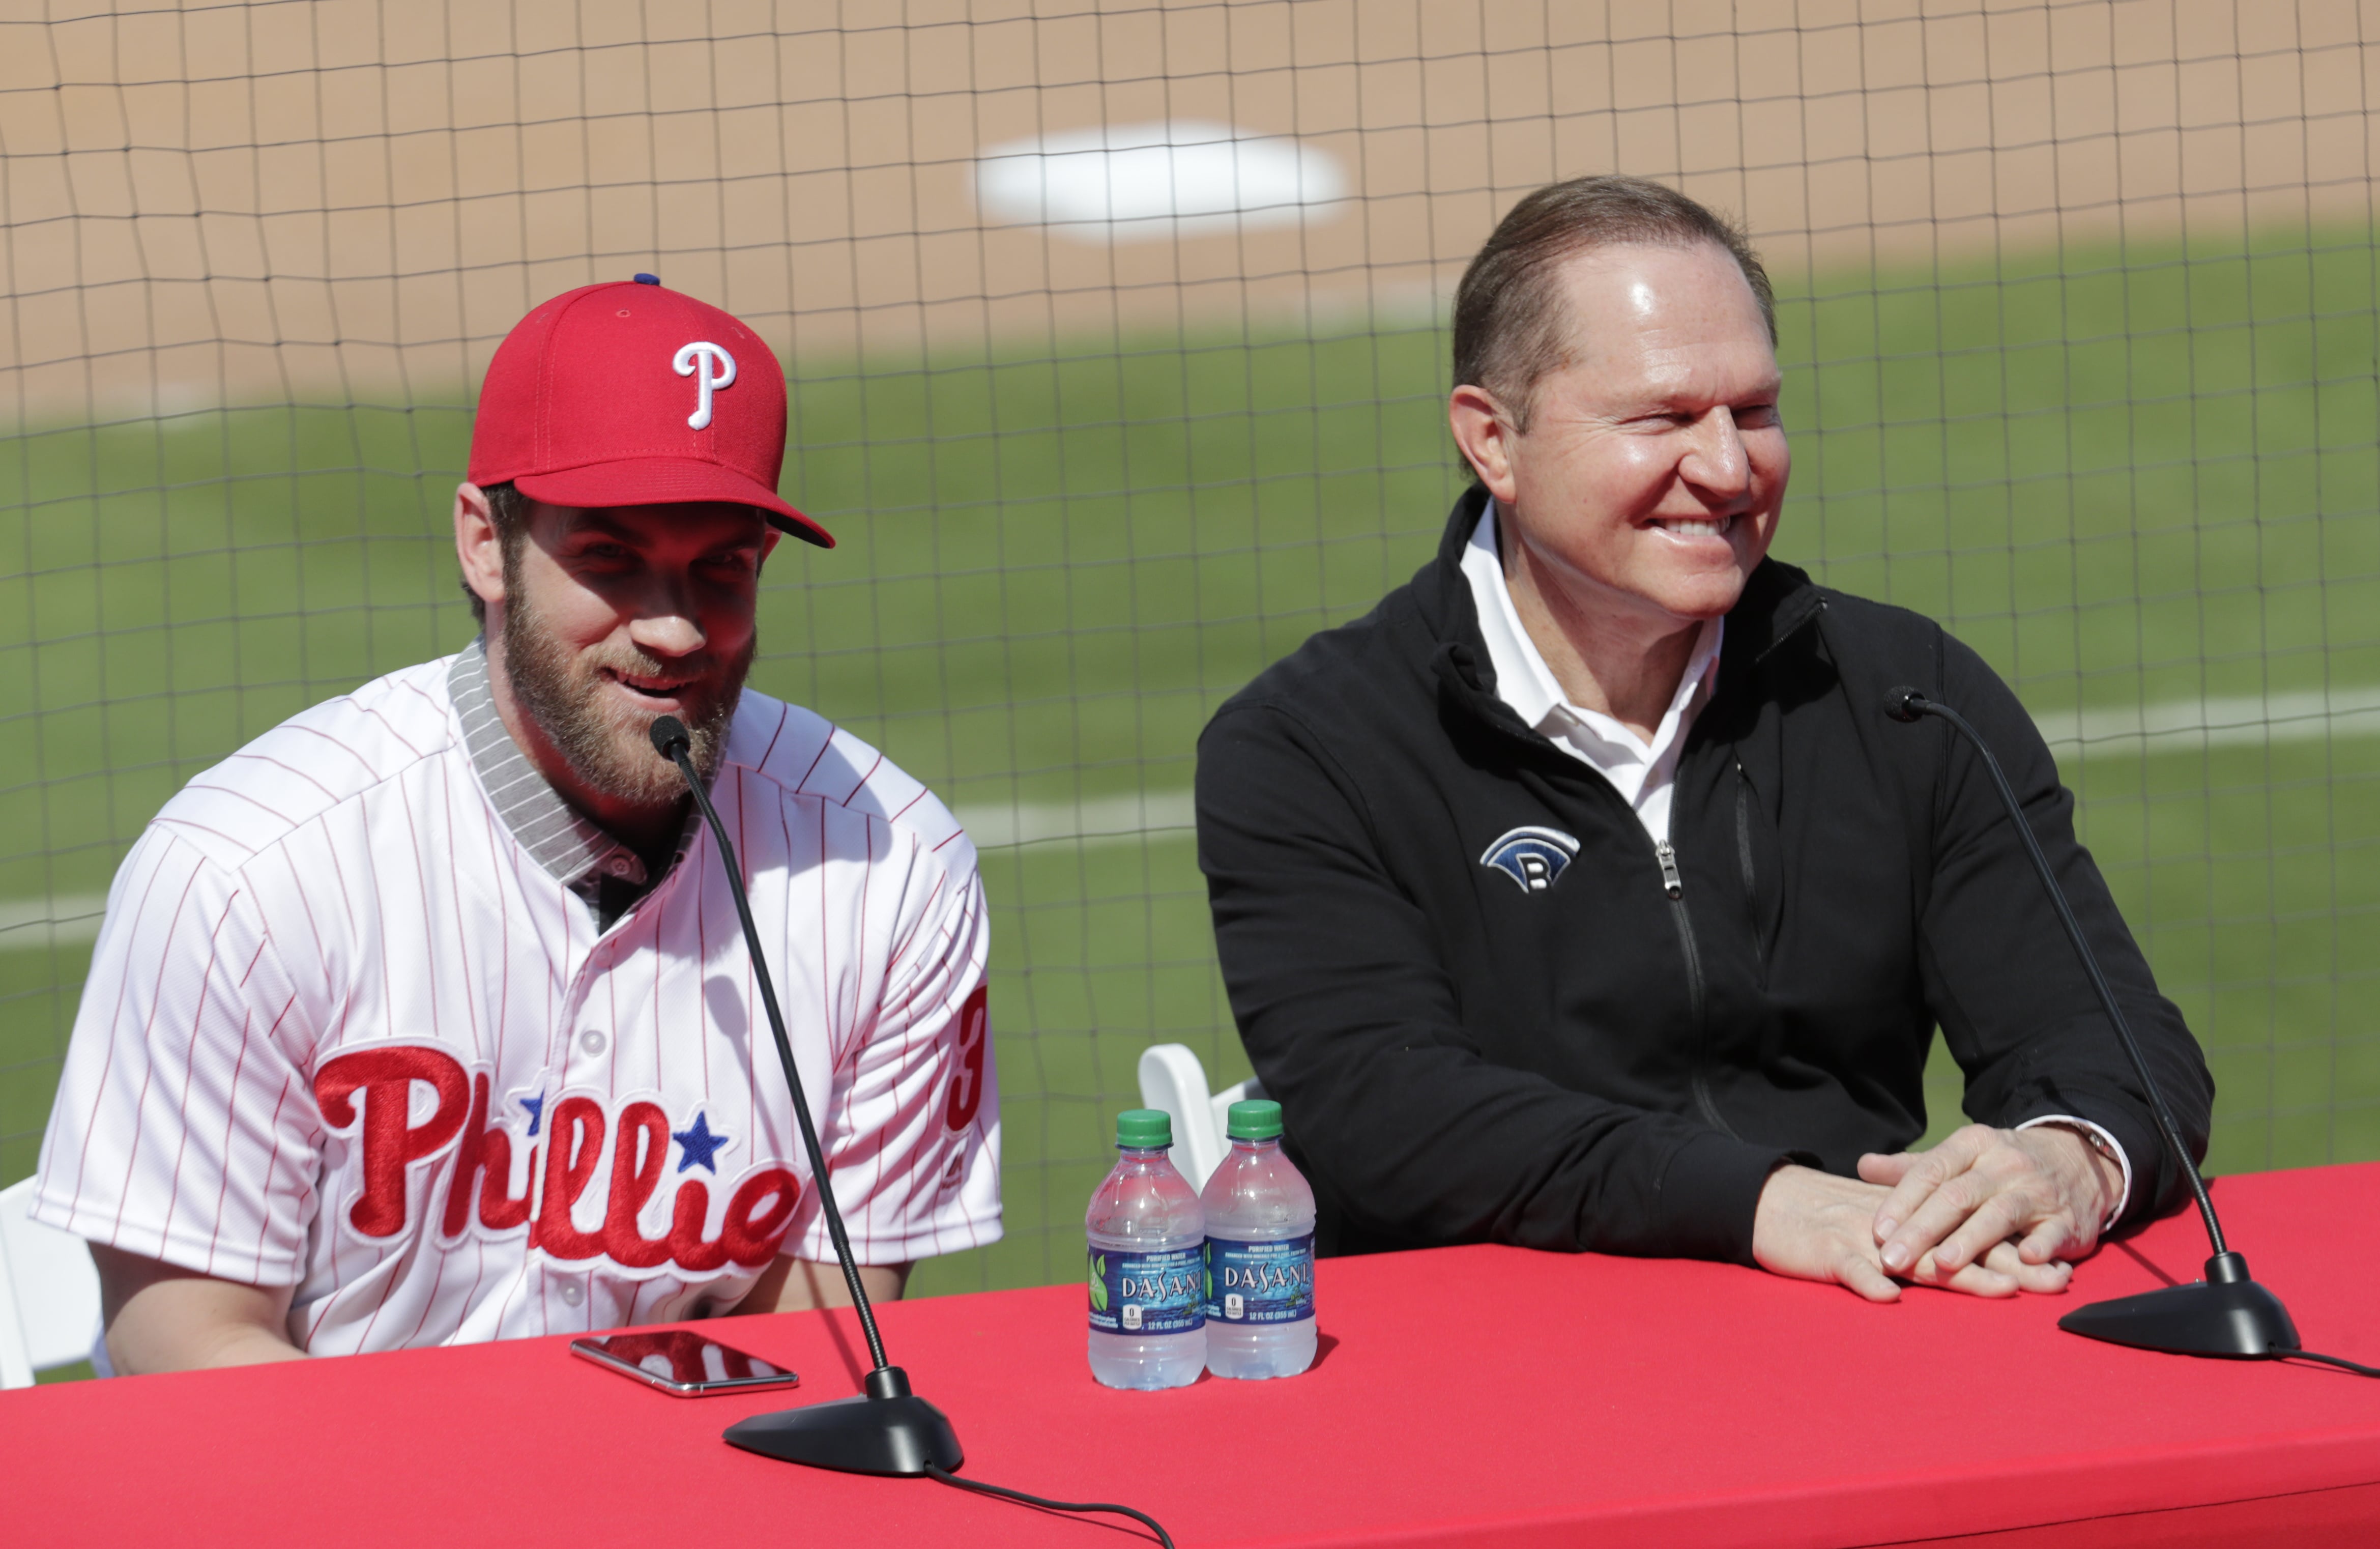 Bryce Harper, left, speaks during a news conference at the Philadelphia Phillies spring training baseball facility as his agent Scott Boras looks on, Saturday, March 2, 2019, in Clearwater, Fla. Harper and the Phillies agreed to a $330 million, 13-year contract, the largest deal in baseball history.